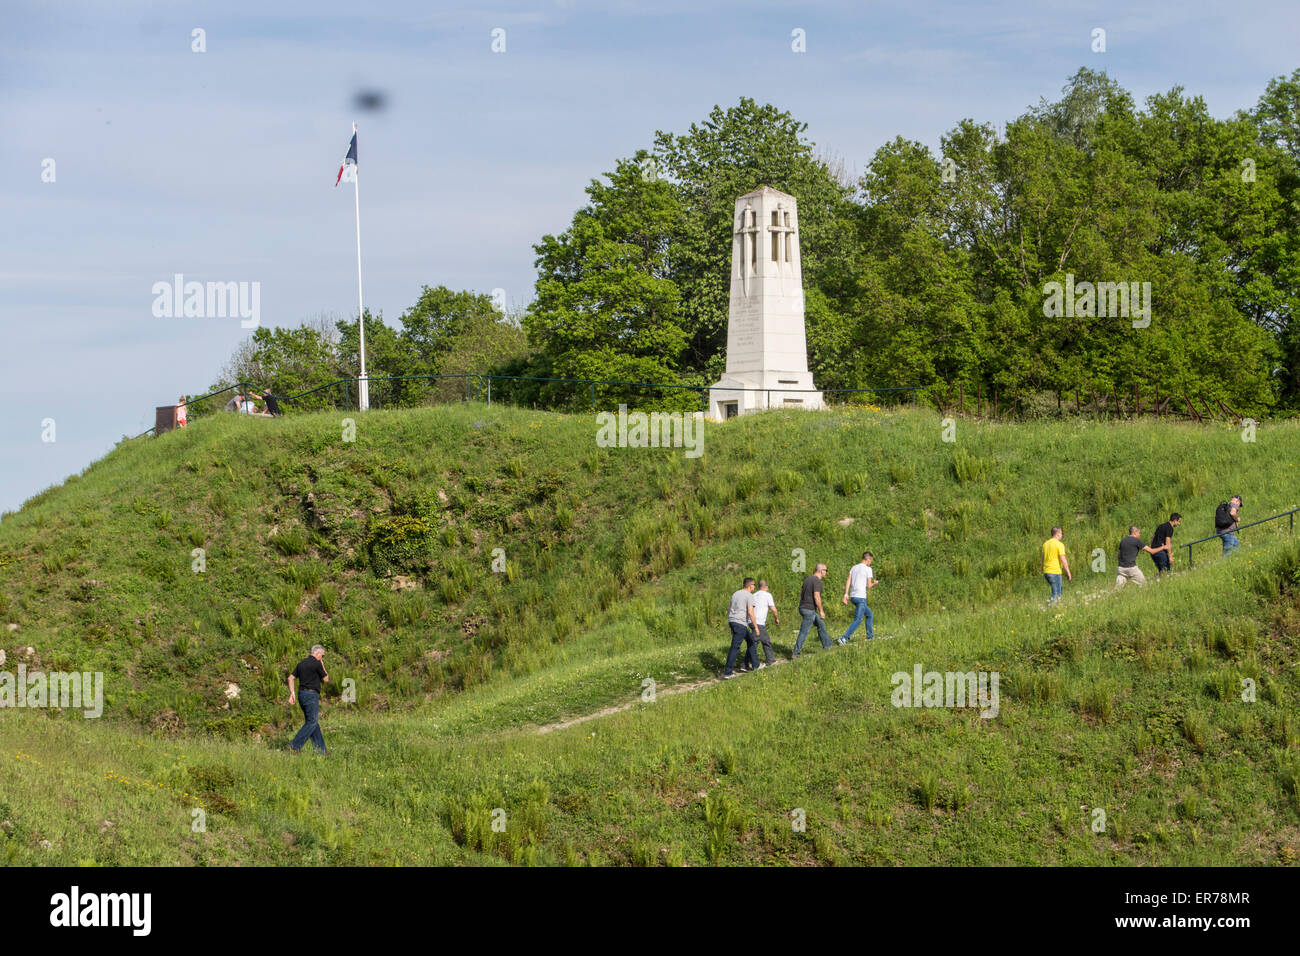 Vauqouis, France. People passing through large craters, created by underground mines during WW1. French flag and a battle memorial on top of the hill. Stock Photo